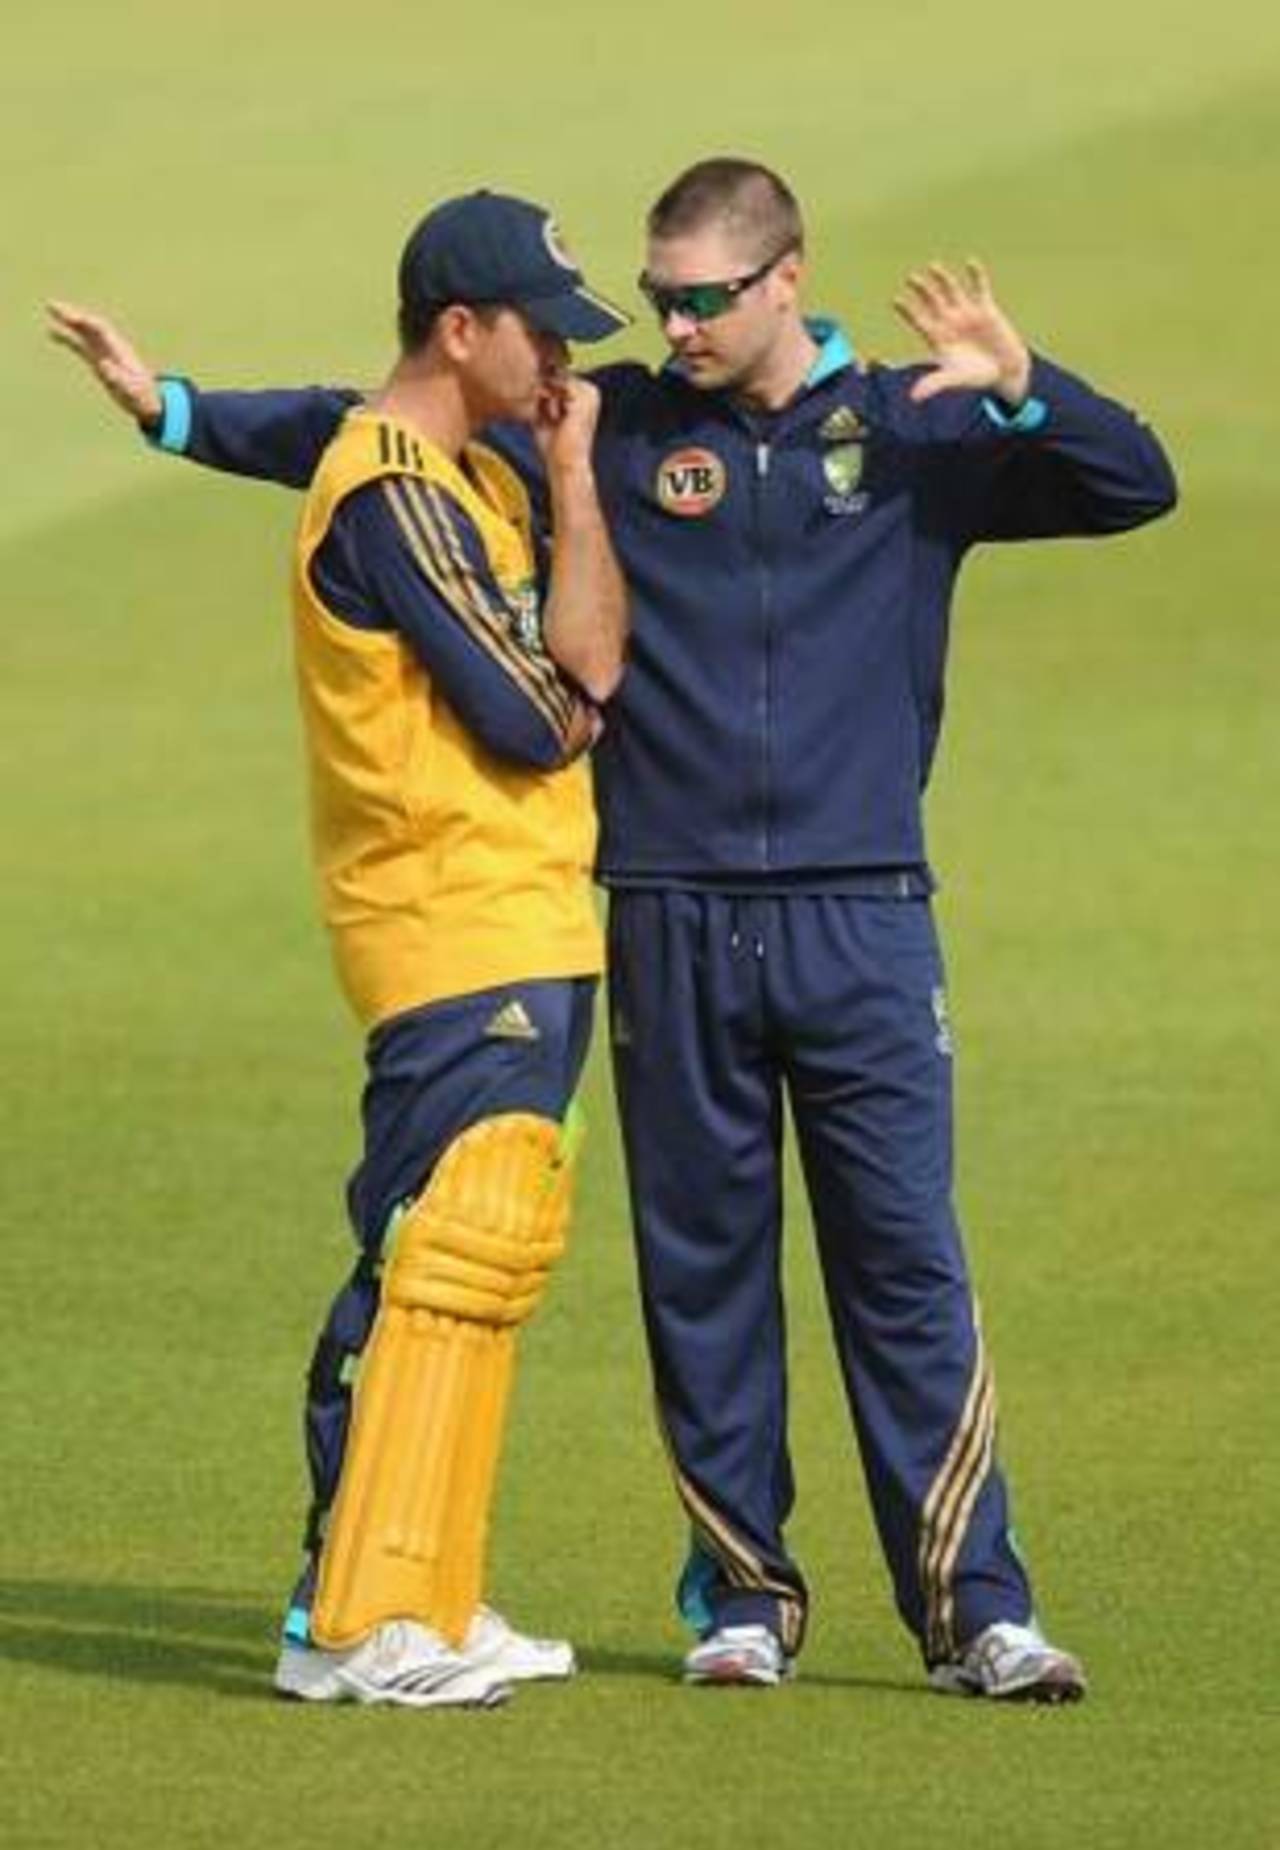 Two captains: Michael Clarke and Ricky Ponting in discussion during training, Trent Bridge, September 14, 2009